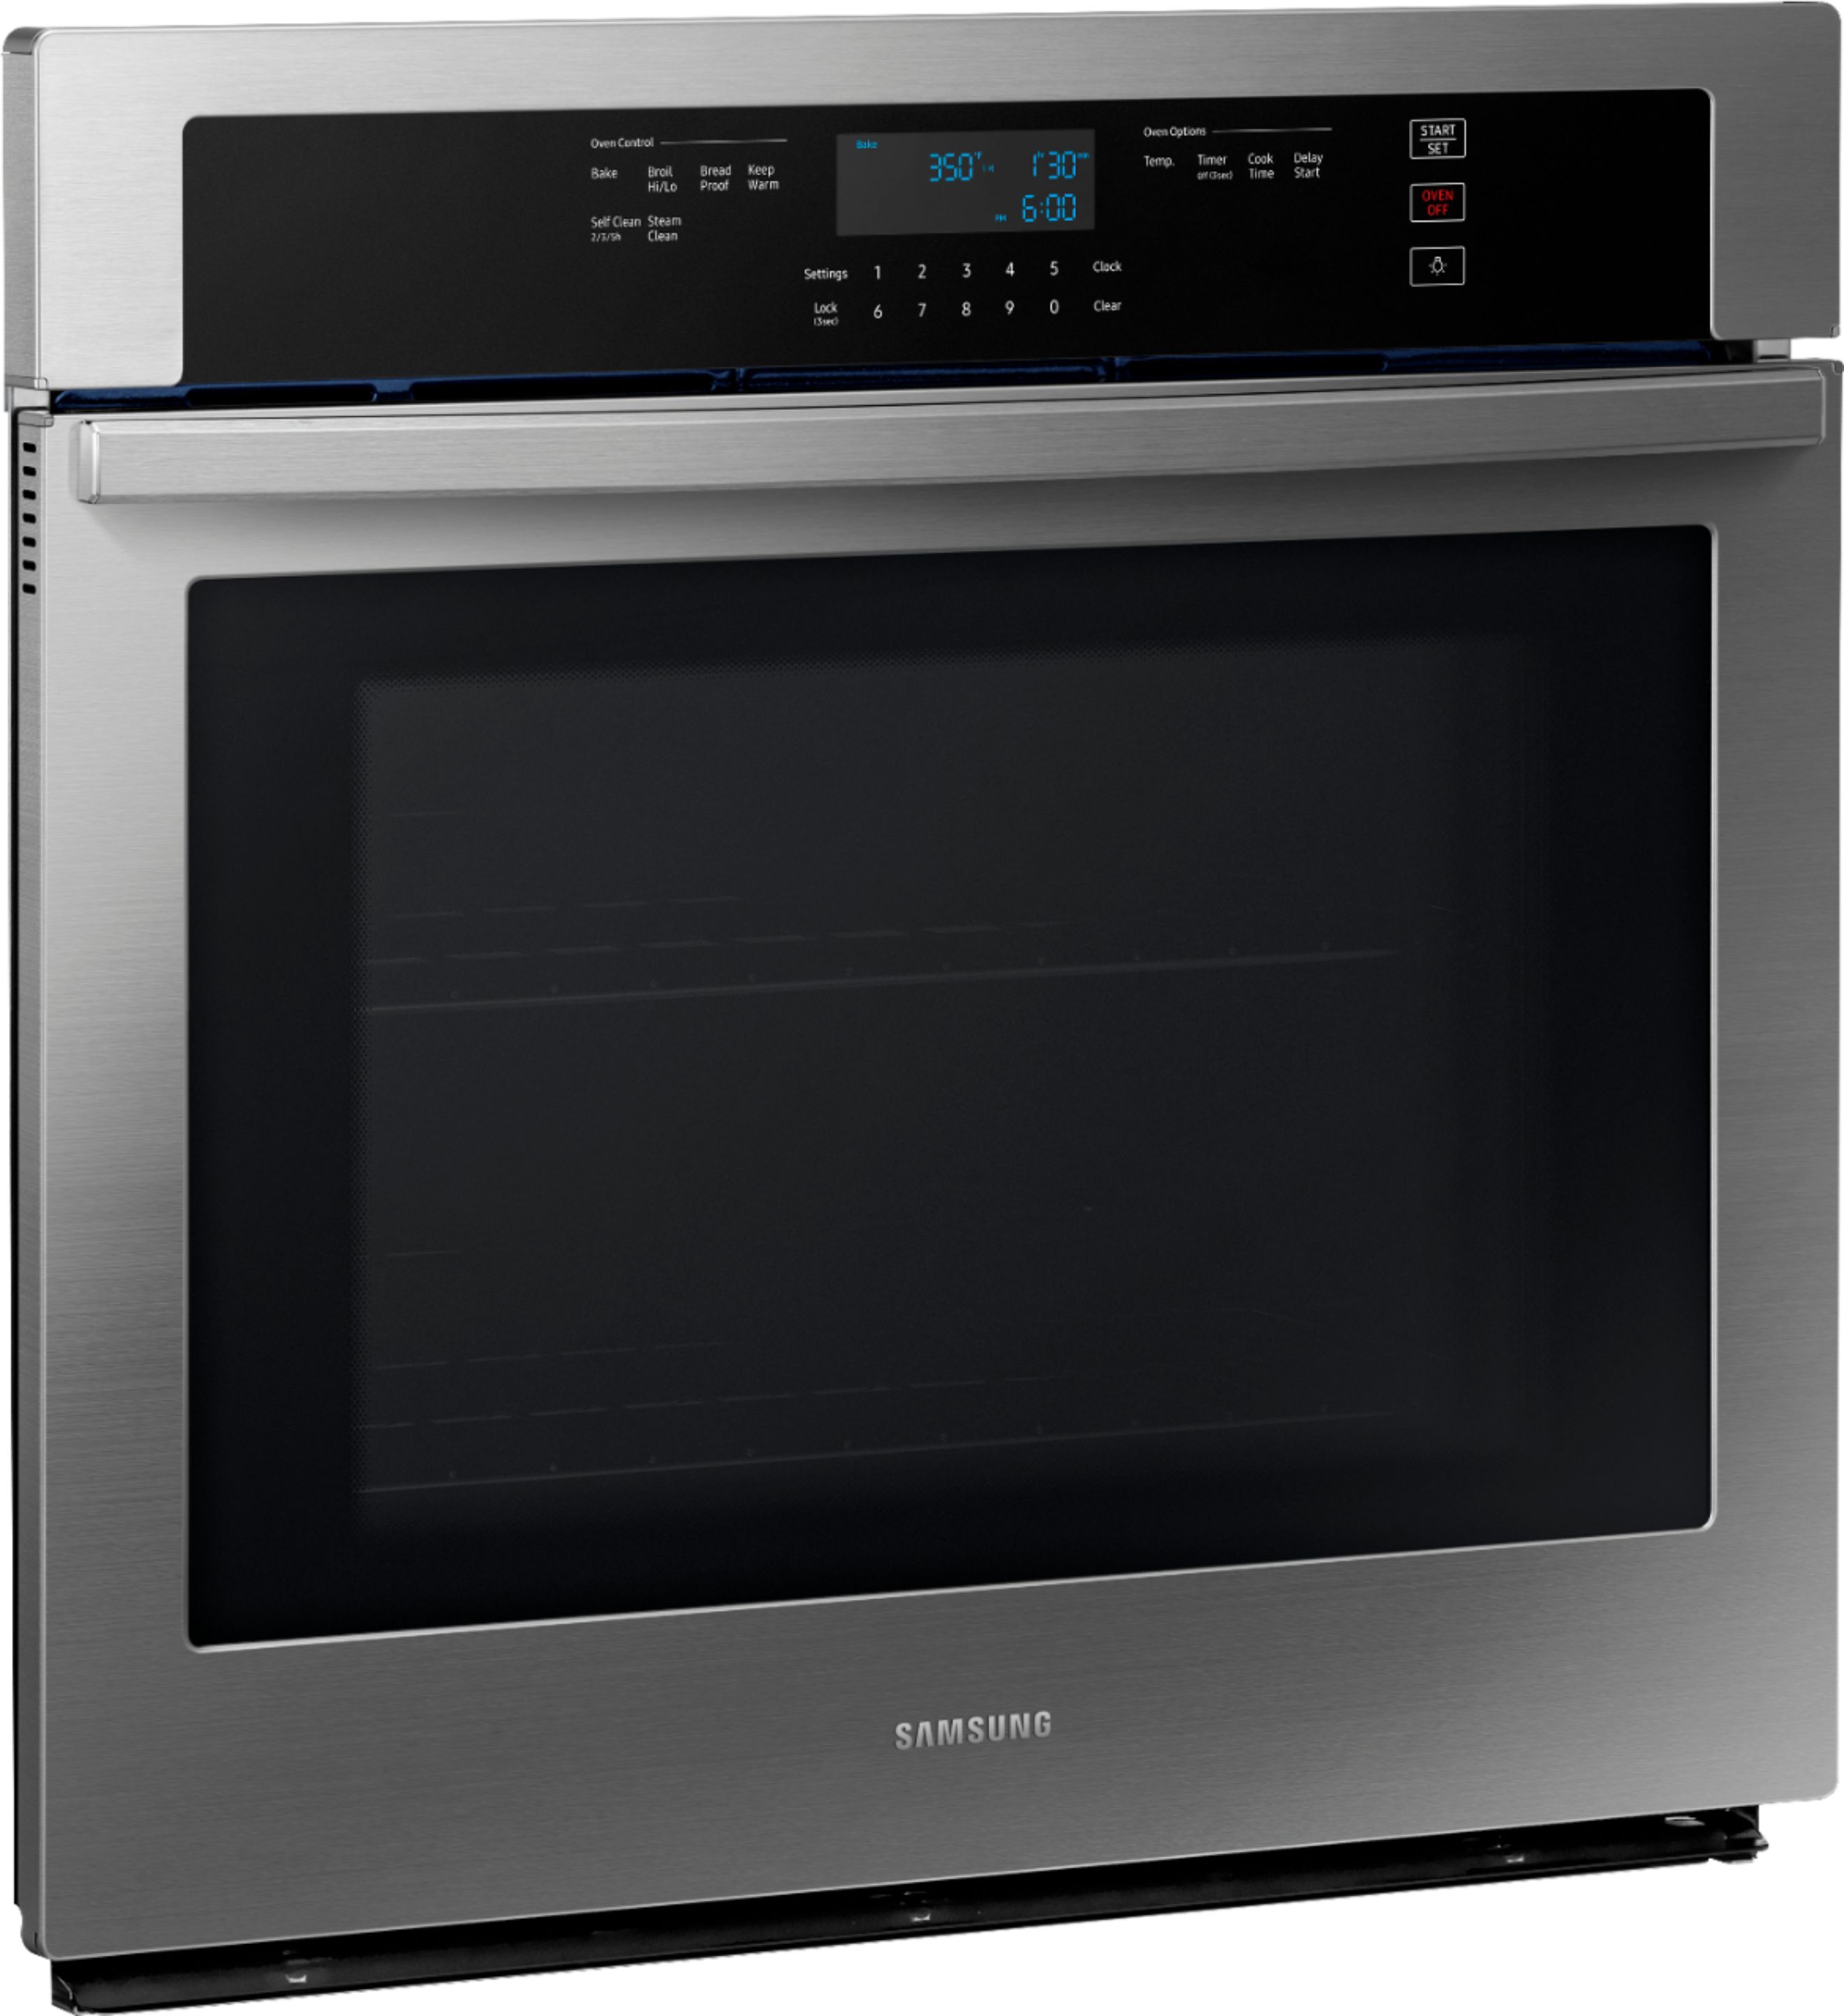 Samsung 30" Built-In Single Electric Wall Oven Black stainless steel Samsung 30 Single Wall Oven Black Stainless Steel